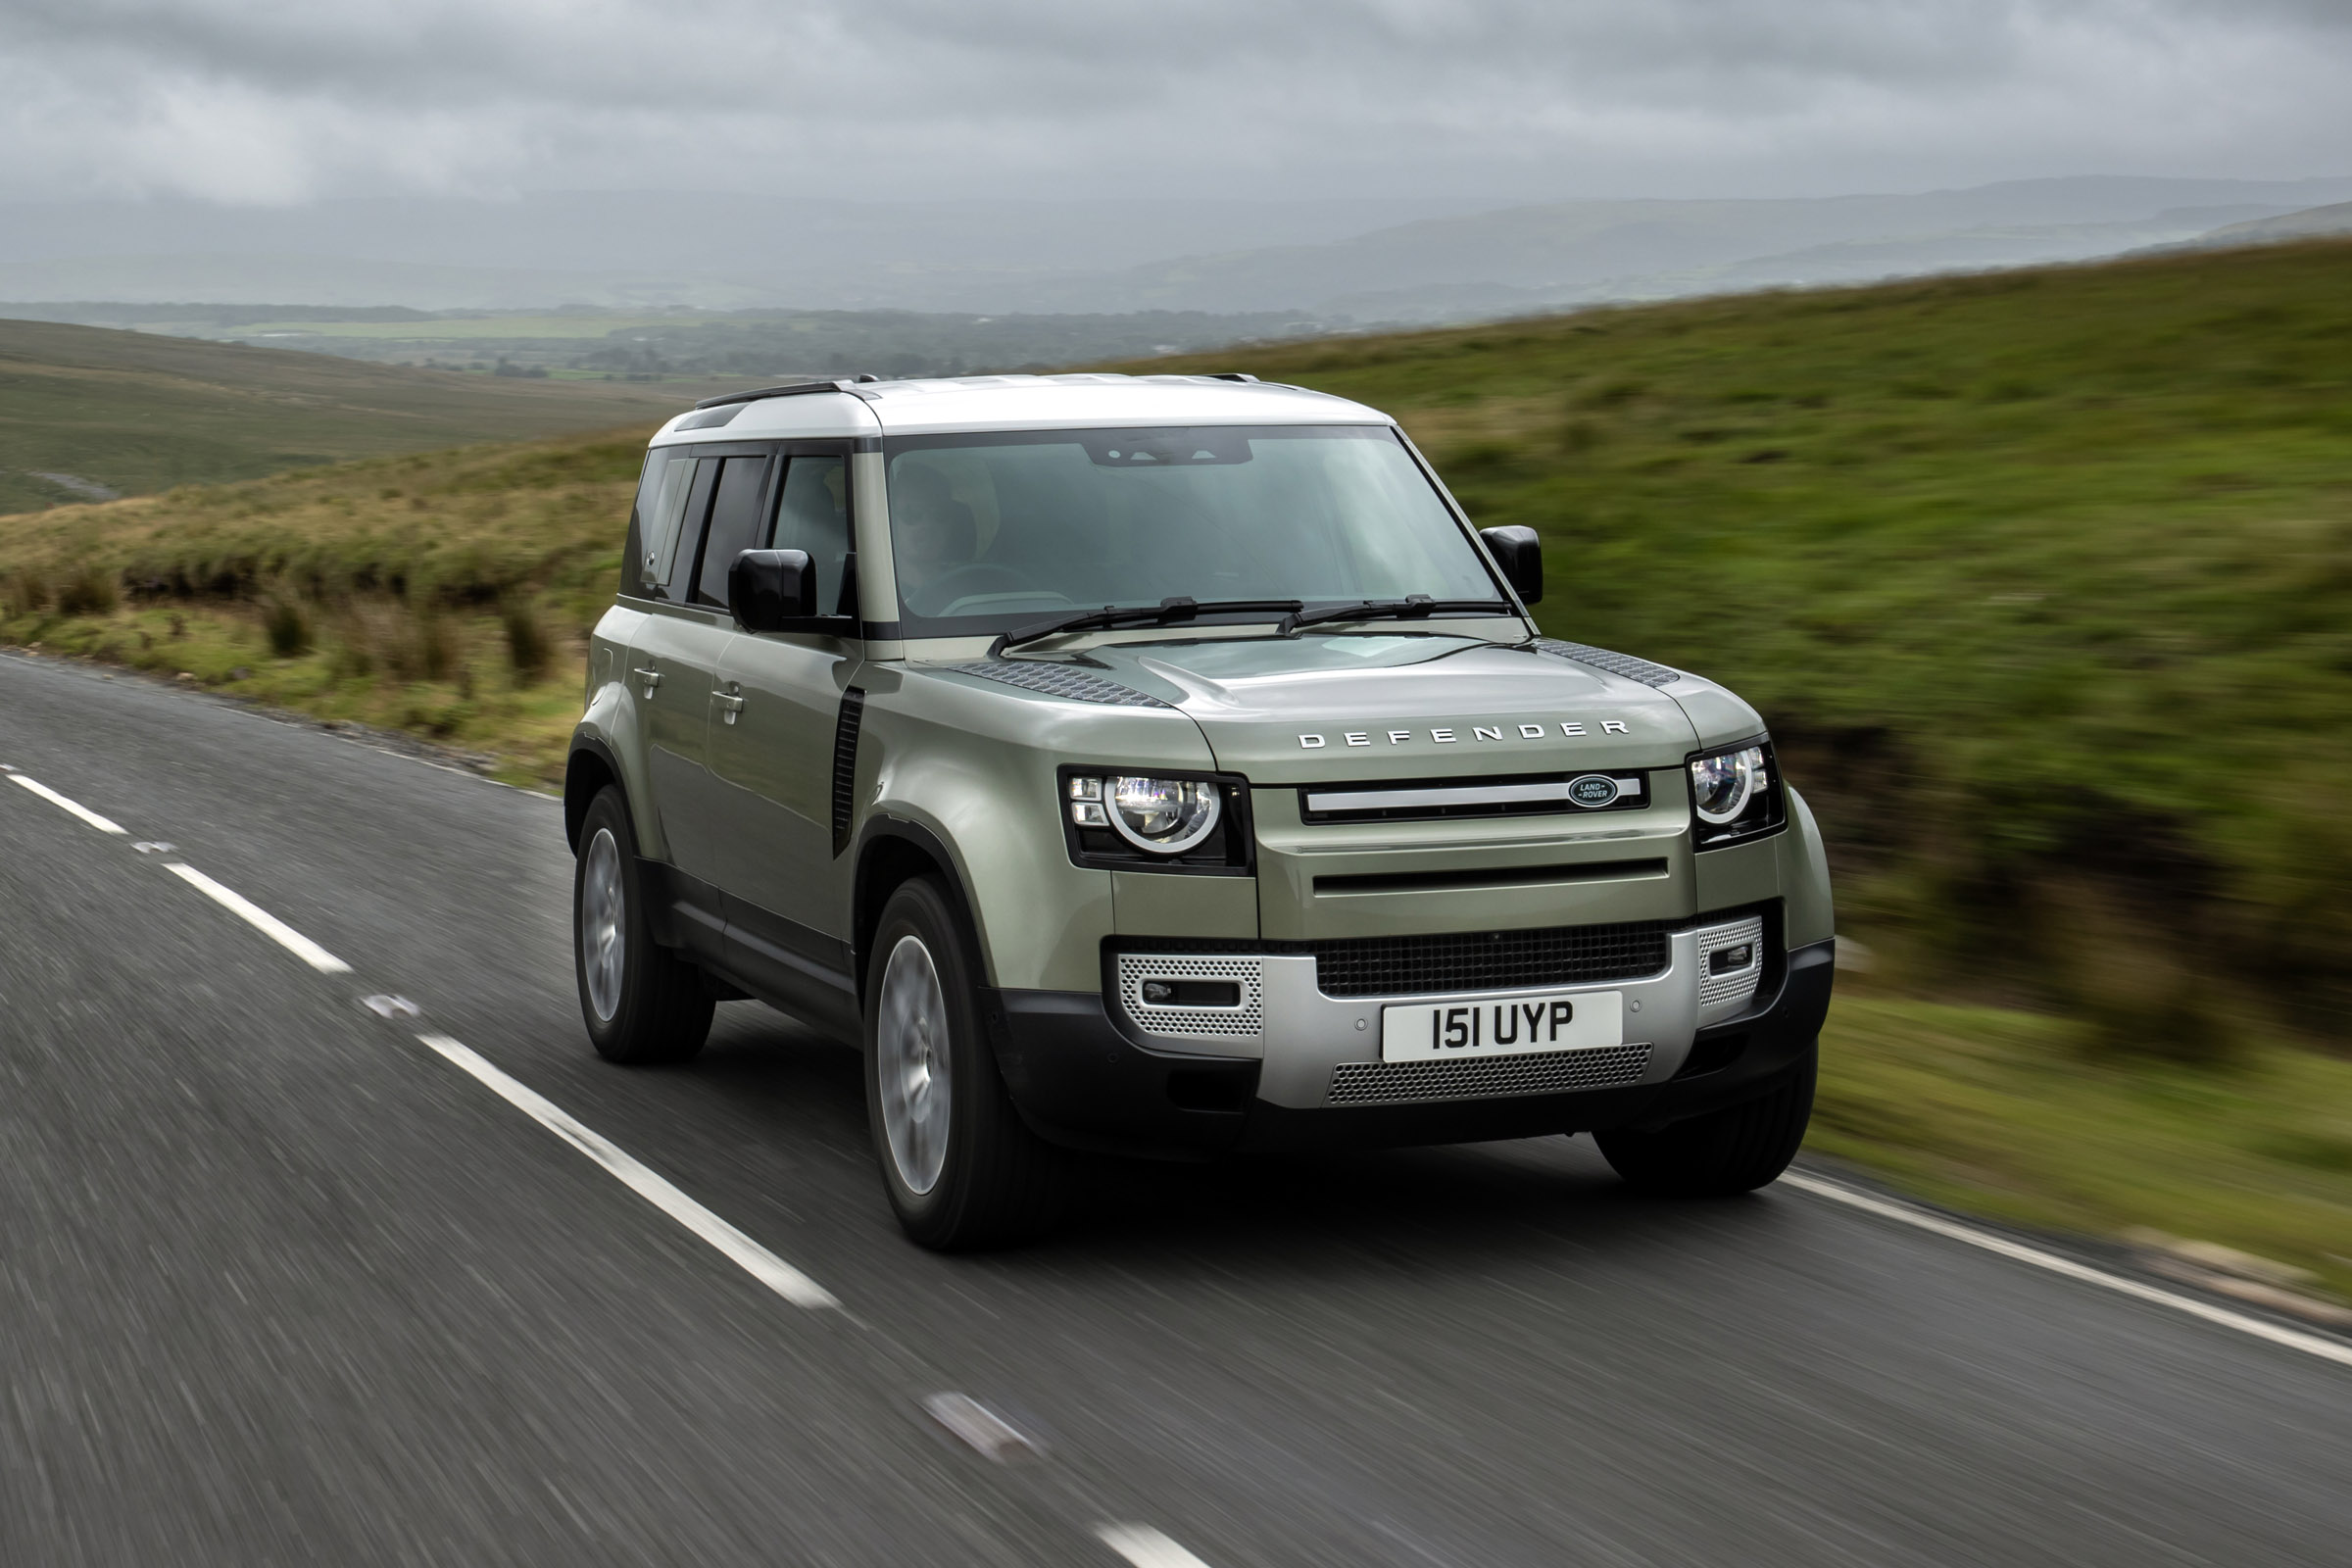 Land Rover Defender review performance and 060 time evo